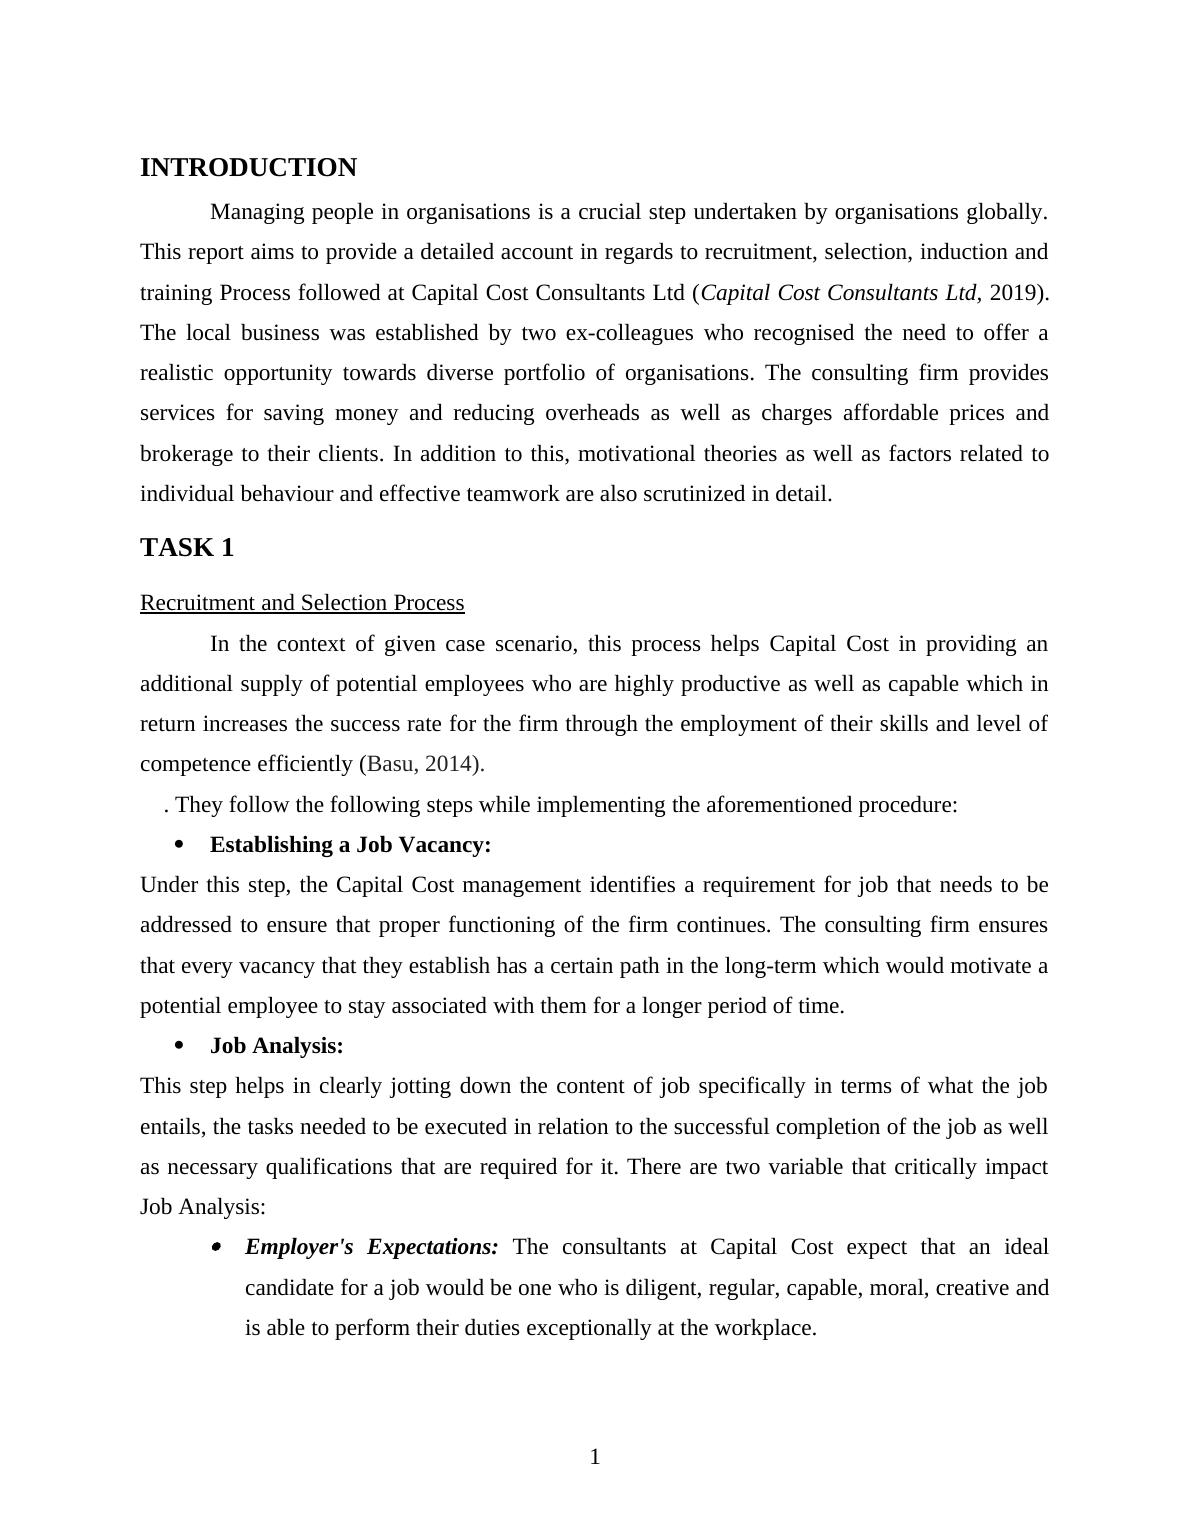 Managing People in Organisations Assignment - Capital Cost Consultants Limited_3